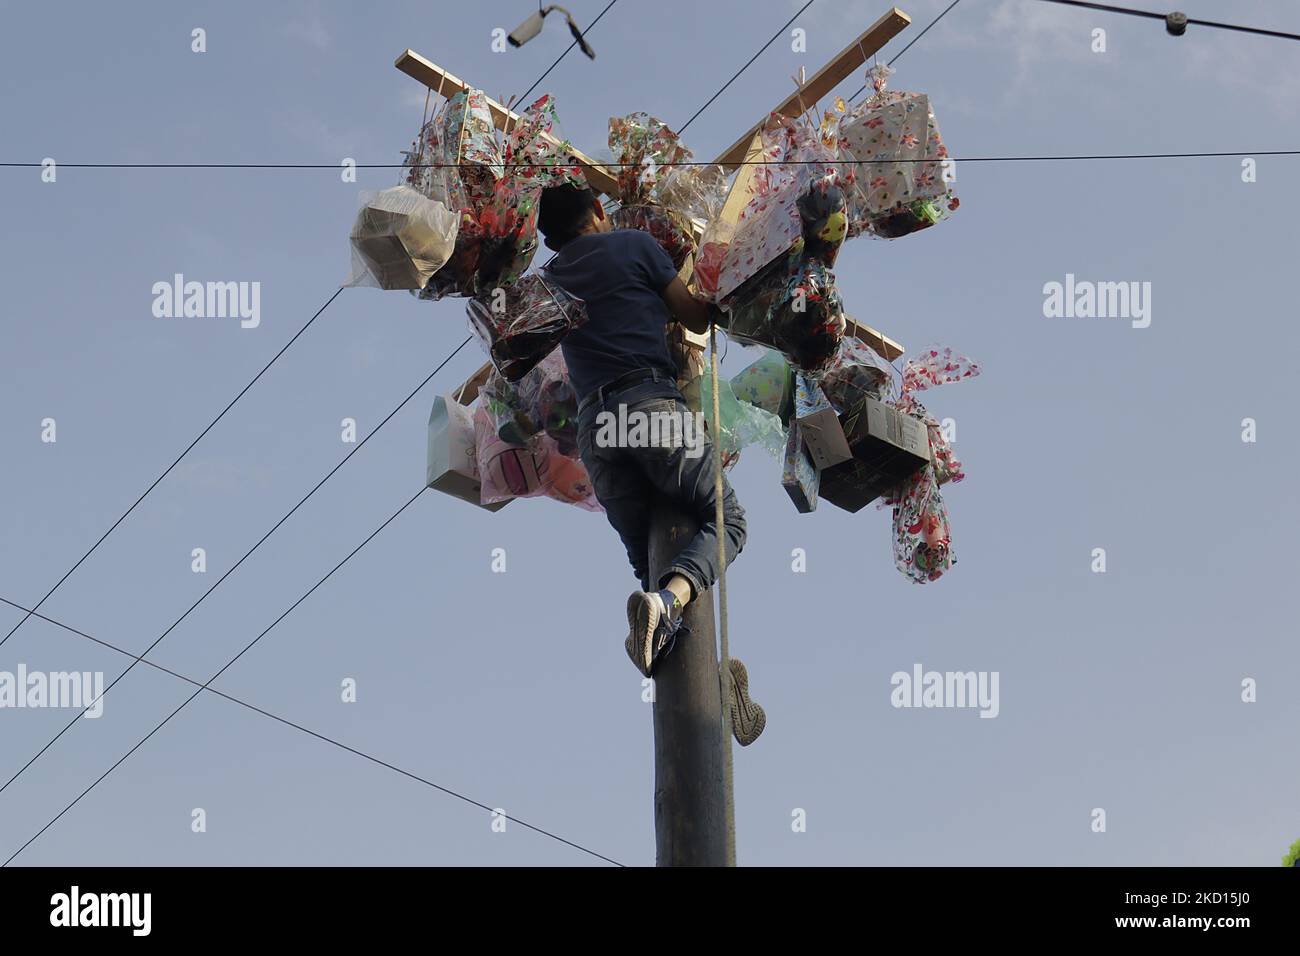 A young man reaches the top of a pole to obtain several prizes as the winner during the game called Palo Ensebado or Cucaña, held in the streets of San Antonio Culhuacán in Mexico City on the occasion of the celebration of San Antonio Abad, patron saint of animals, which took place during the COVID-19 health emergency and the return to the yellow epidemiological traffic light after the increase in coronavirus infections in the capital. This game originated in Naples, Italy, in the 16th century. In its Mexican version, it consists of organising a team of people of different complexions to obtai Stock Photo